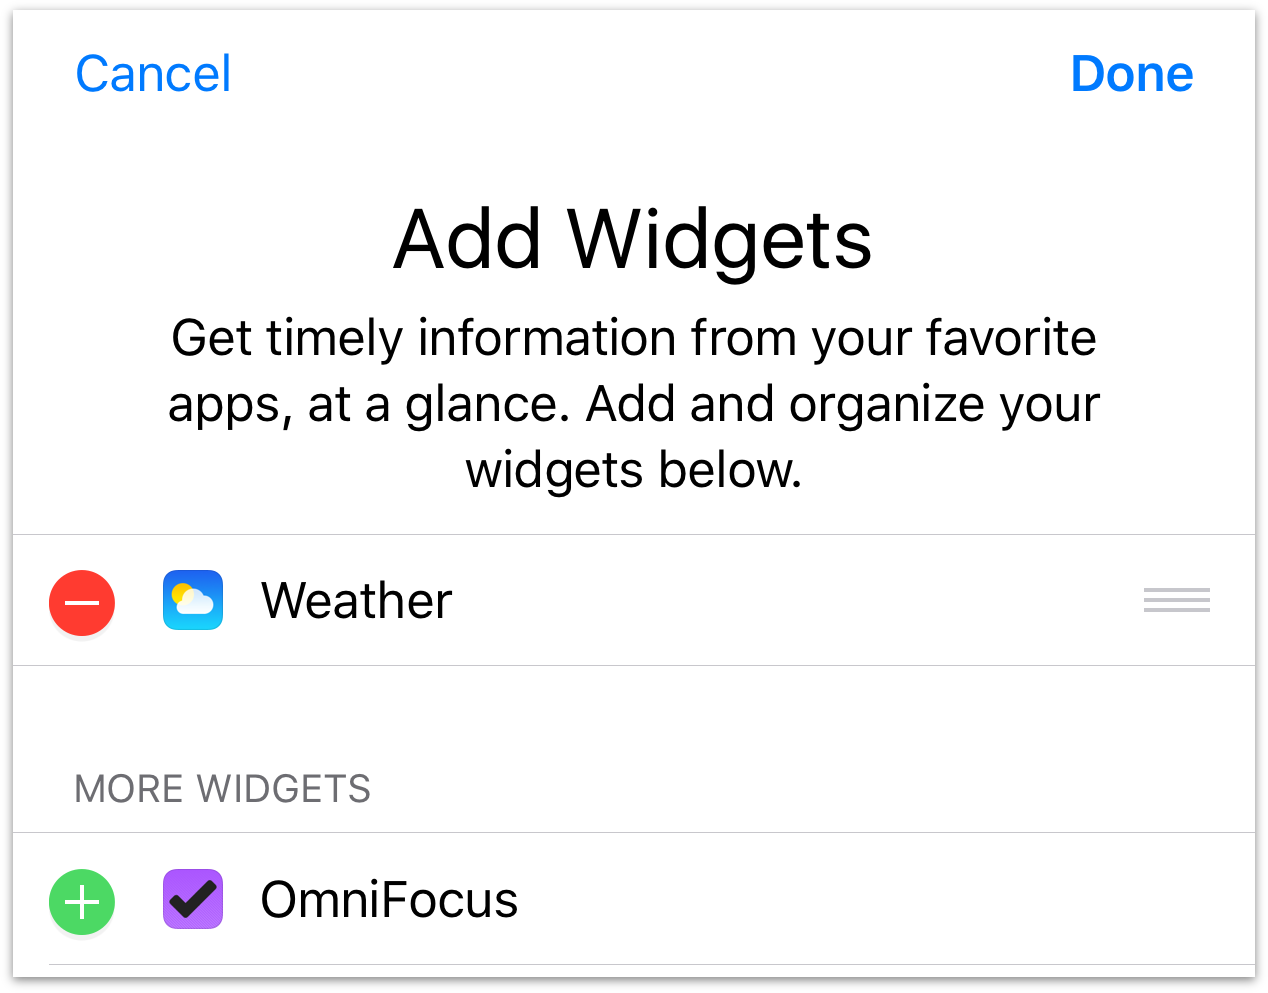 Setting up the Today extension with OmniFocus close to the top of the list.